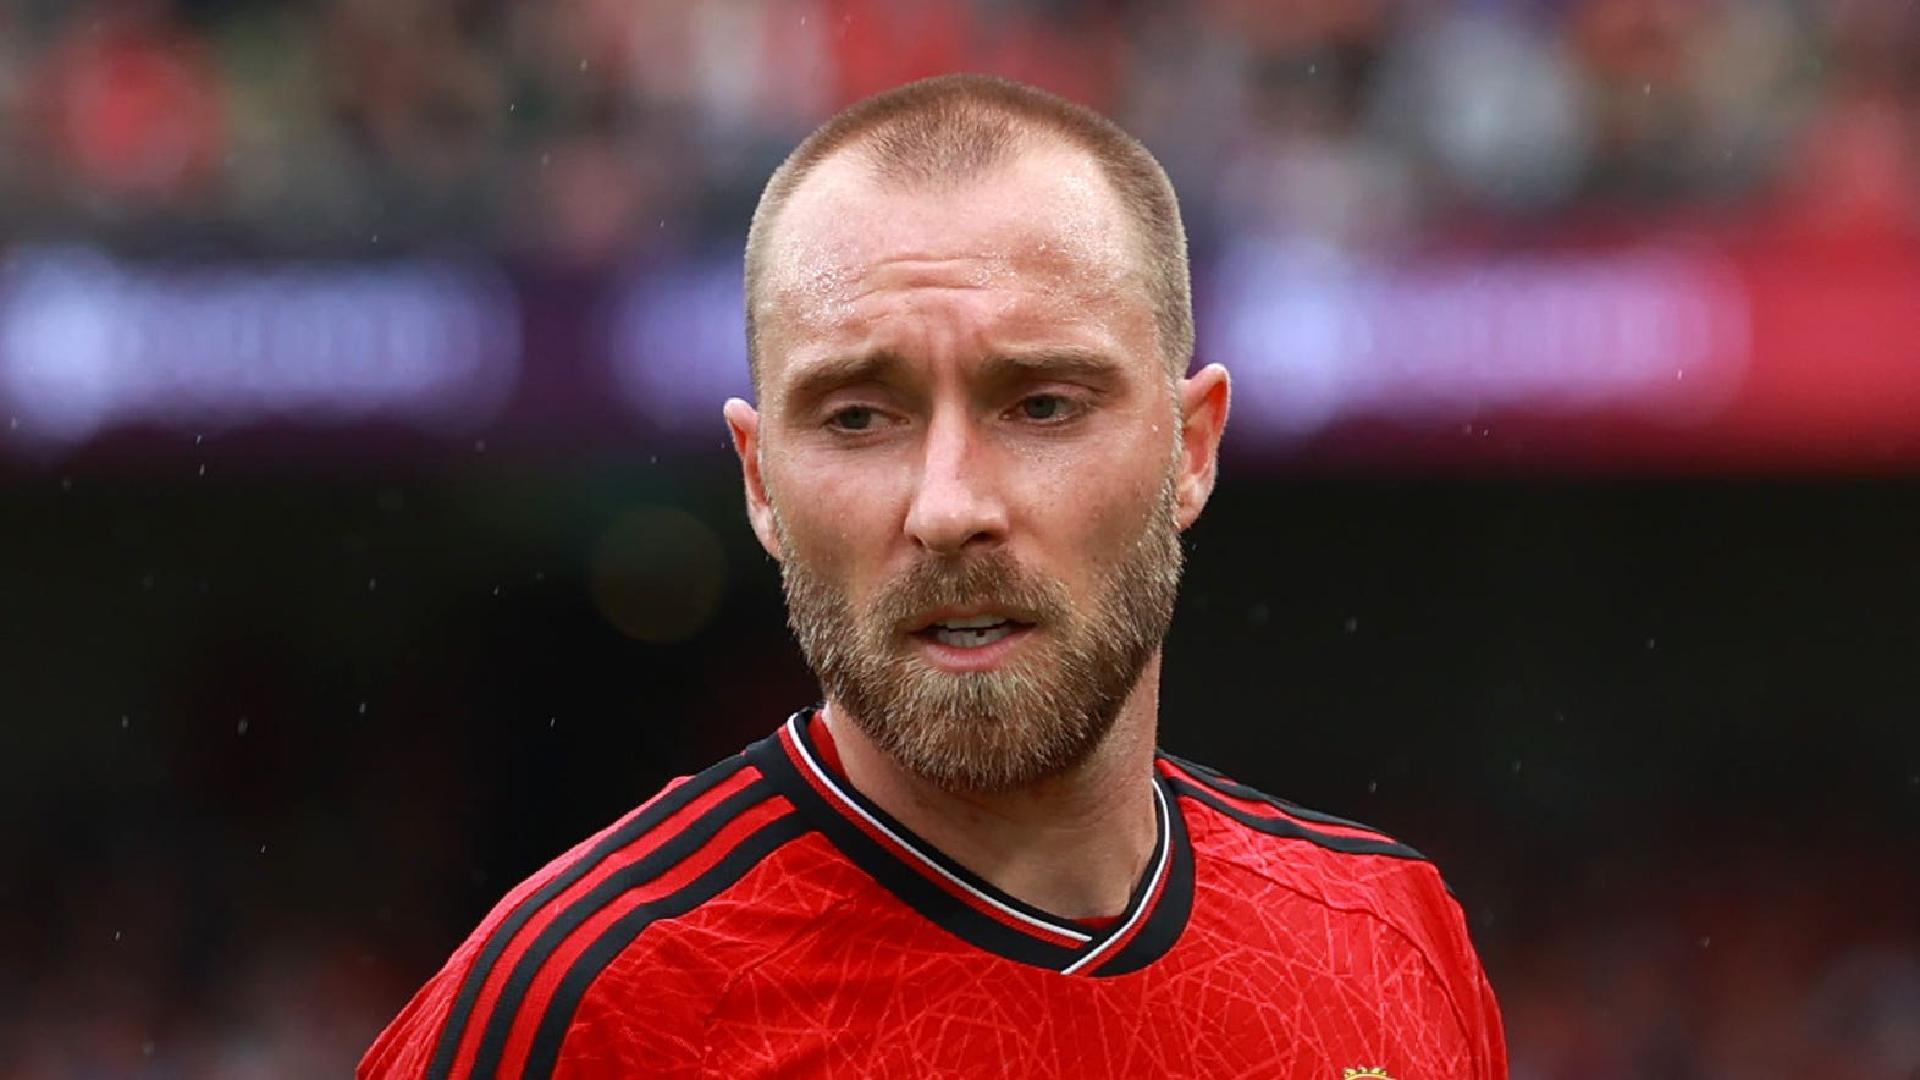 Manchester United midfielder Christian Eriksen wants to leave the club this summer.